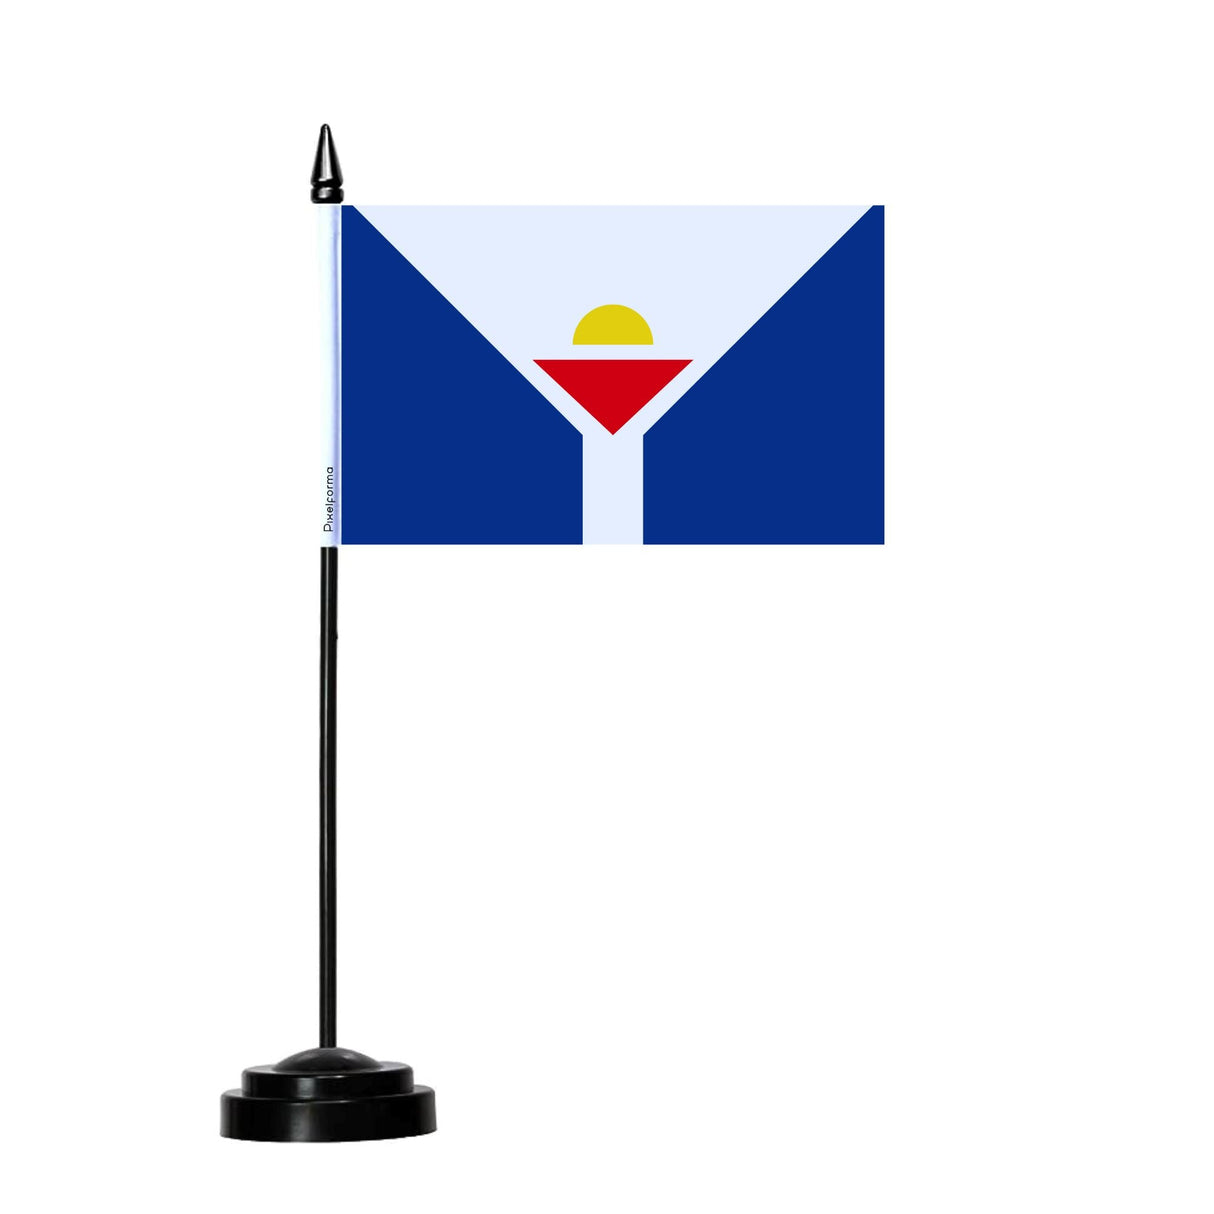 Table Flag of Saint-Martin (French West Indies) - Pixelforma